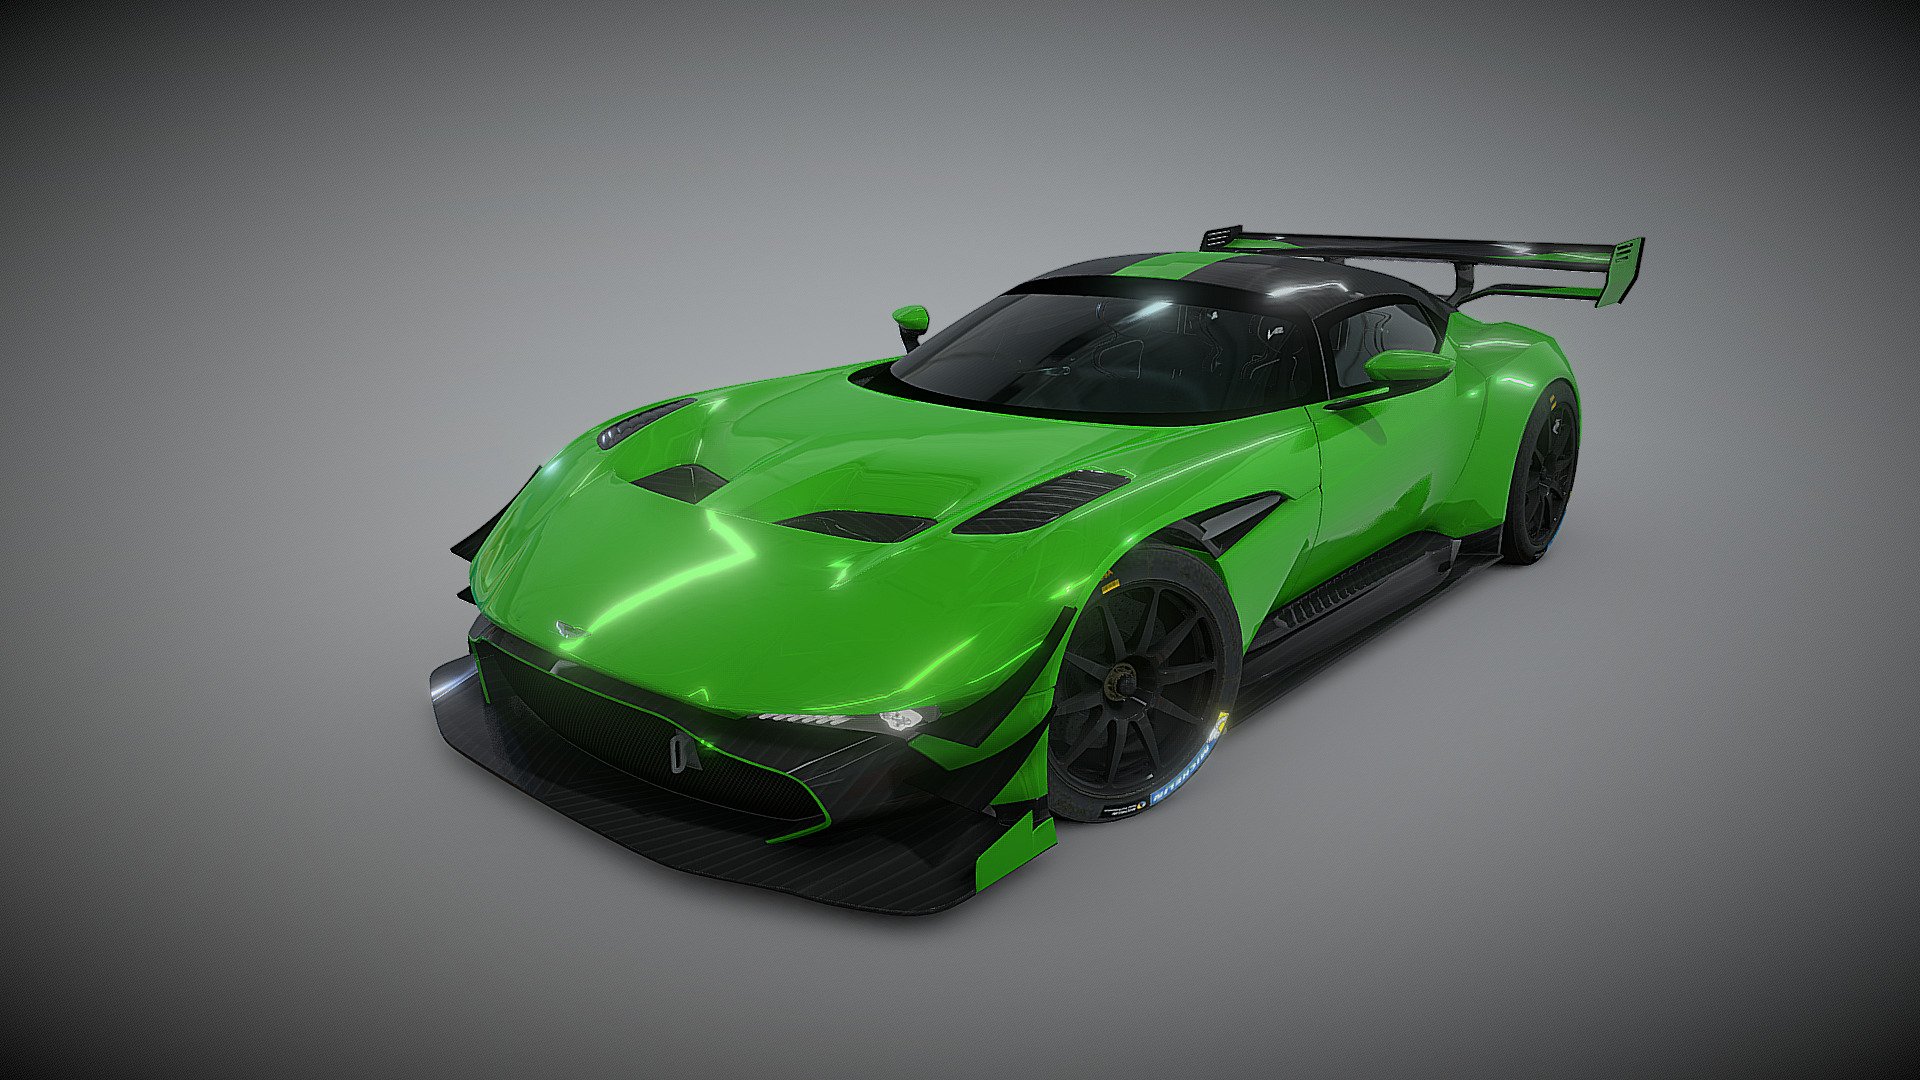 Aston Martin Vulcan - 2018 Edition + race sticky tires

will be further cleaning the mesh up &amp; re-releasing to be a paid content that includes a unitypackage as well

Dont Ask for free downloads, it will never happen! - Aston Martin Vulcan - 2018 Edition - 3D model by OGL (@GaryLim) 3d model